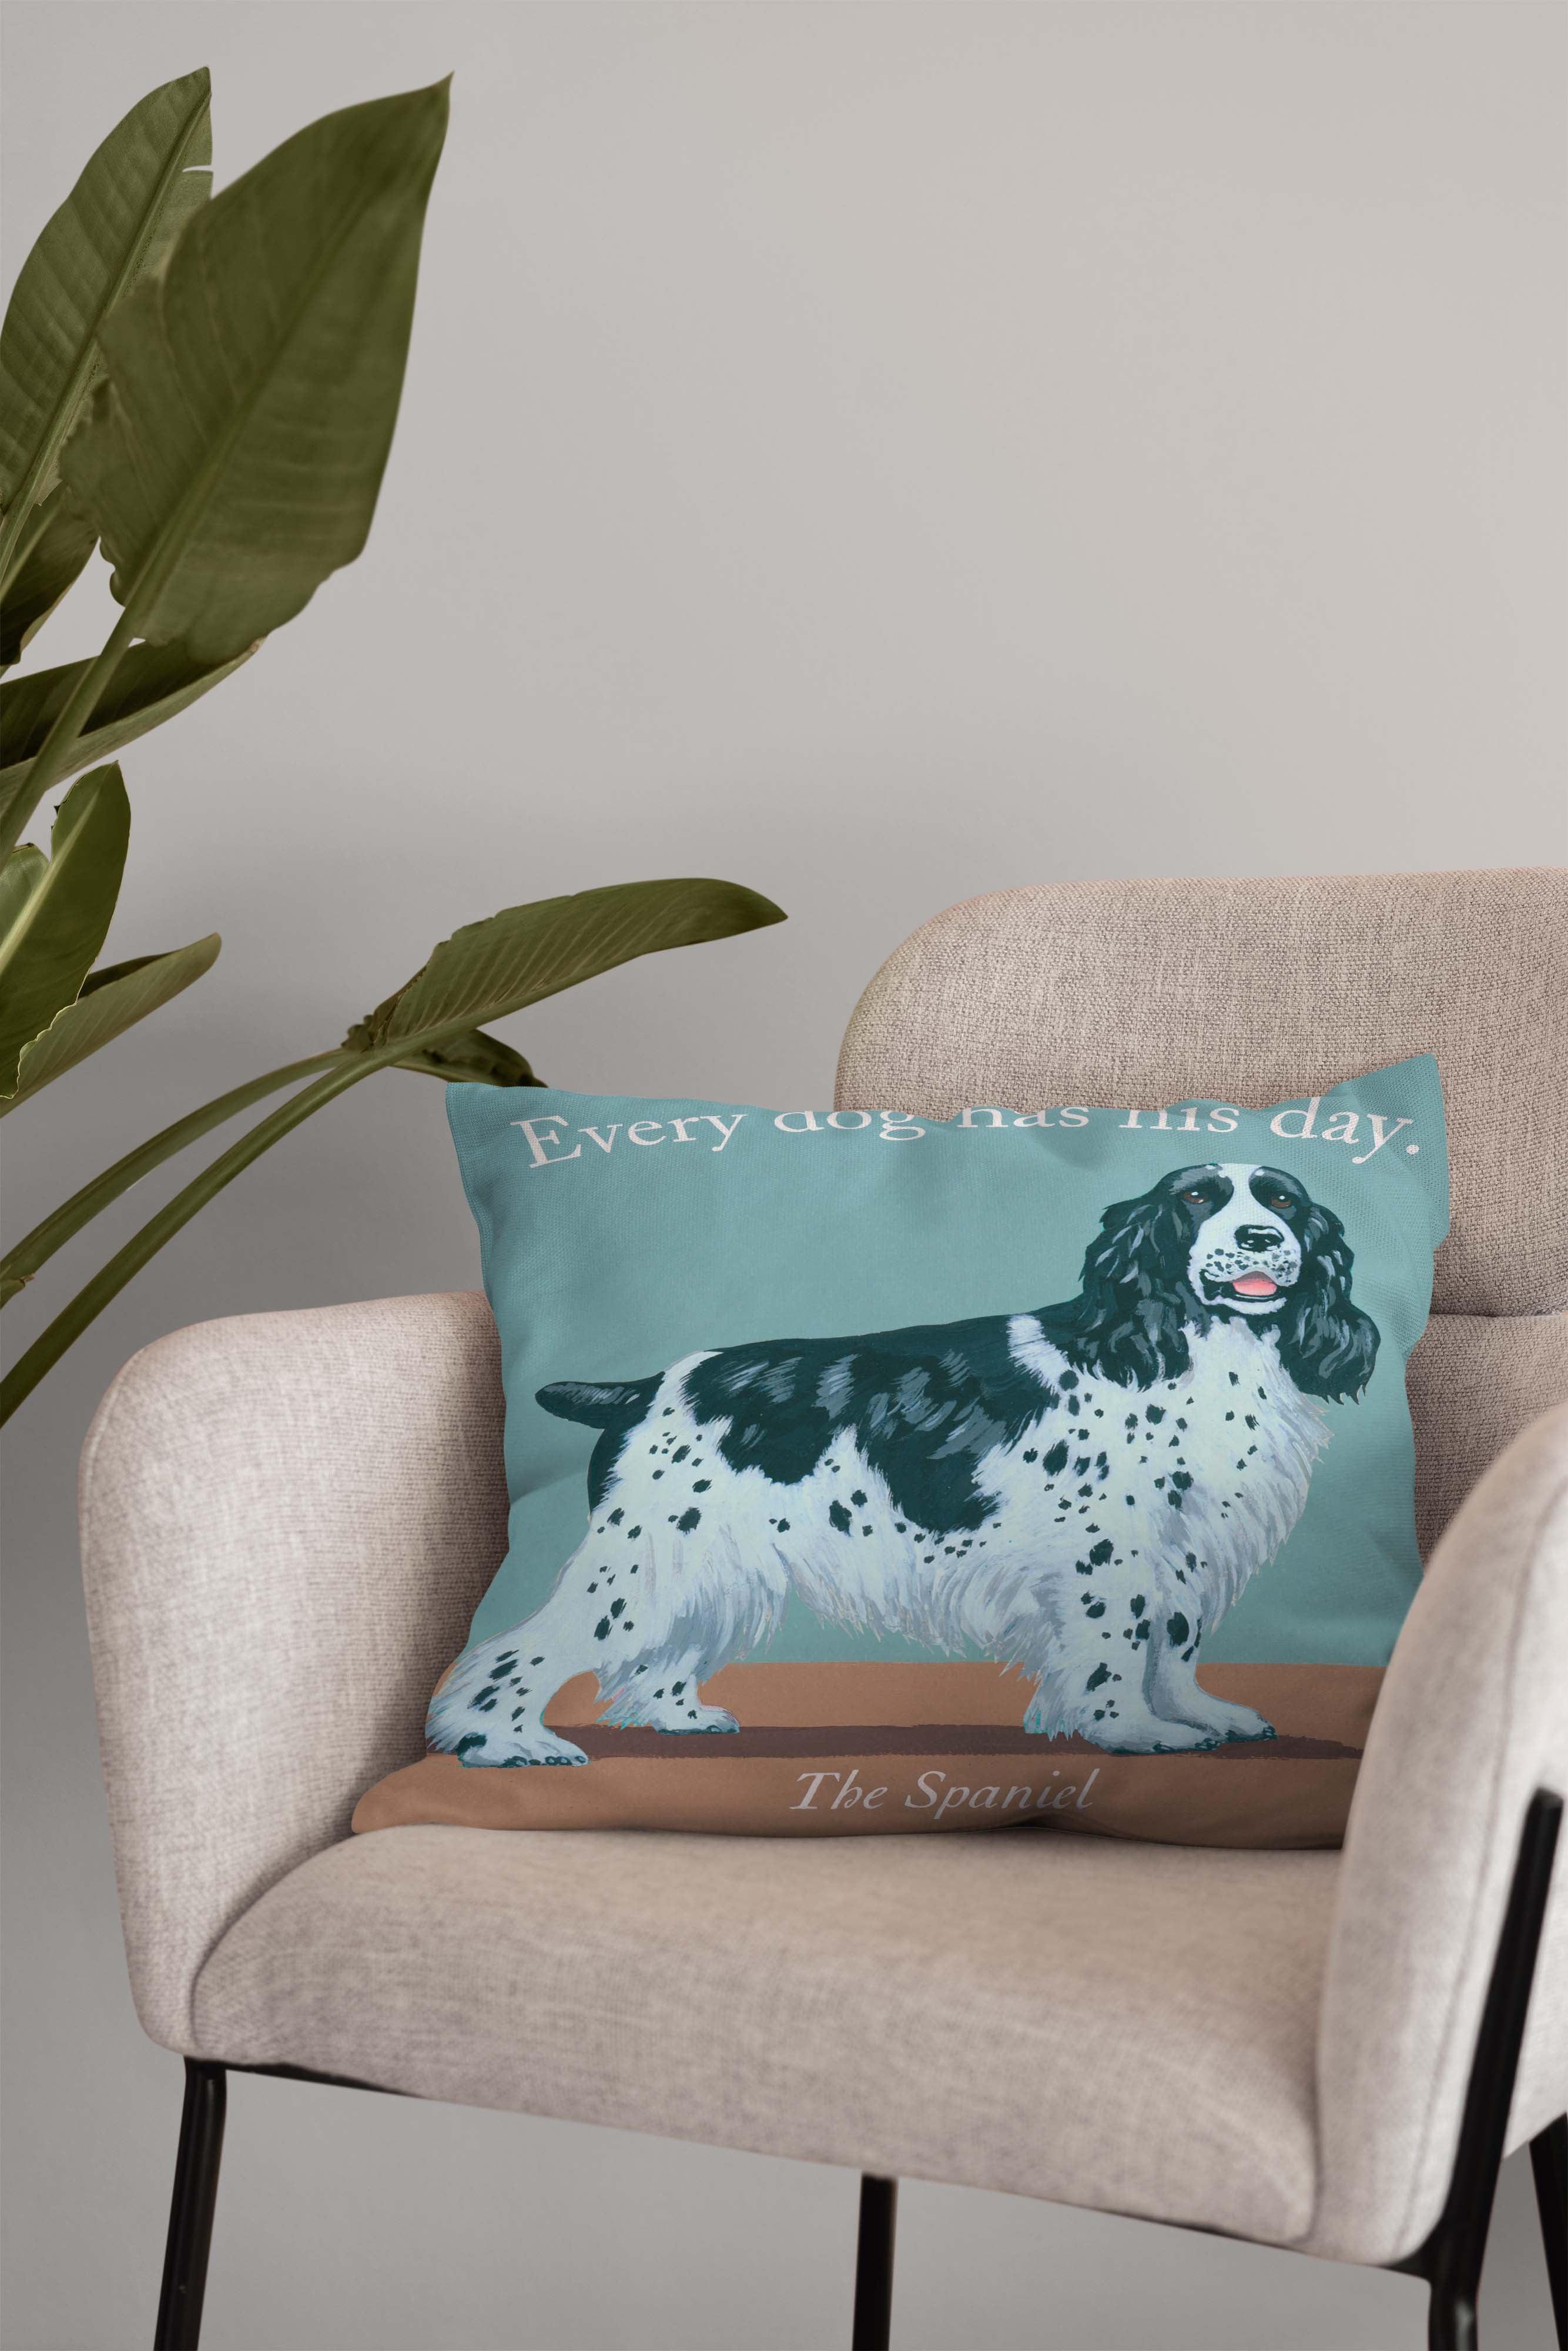 Every Dog Has His Day - Martin Wiscombe - Art Print Cushion